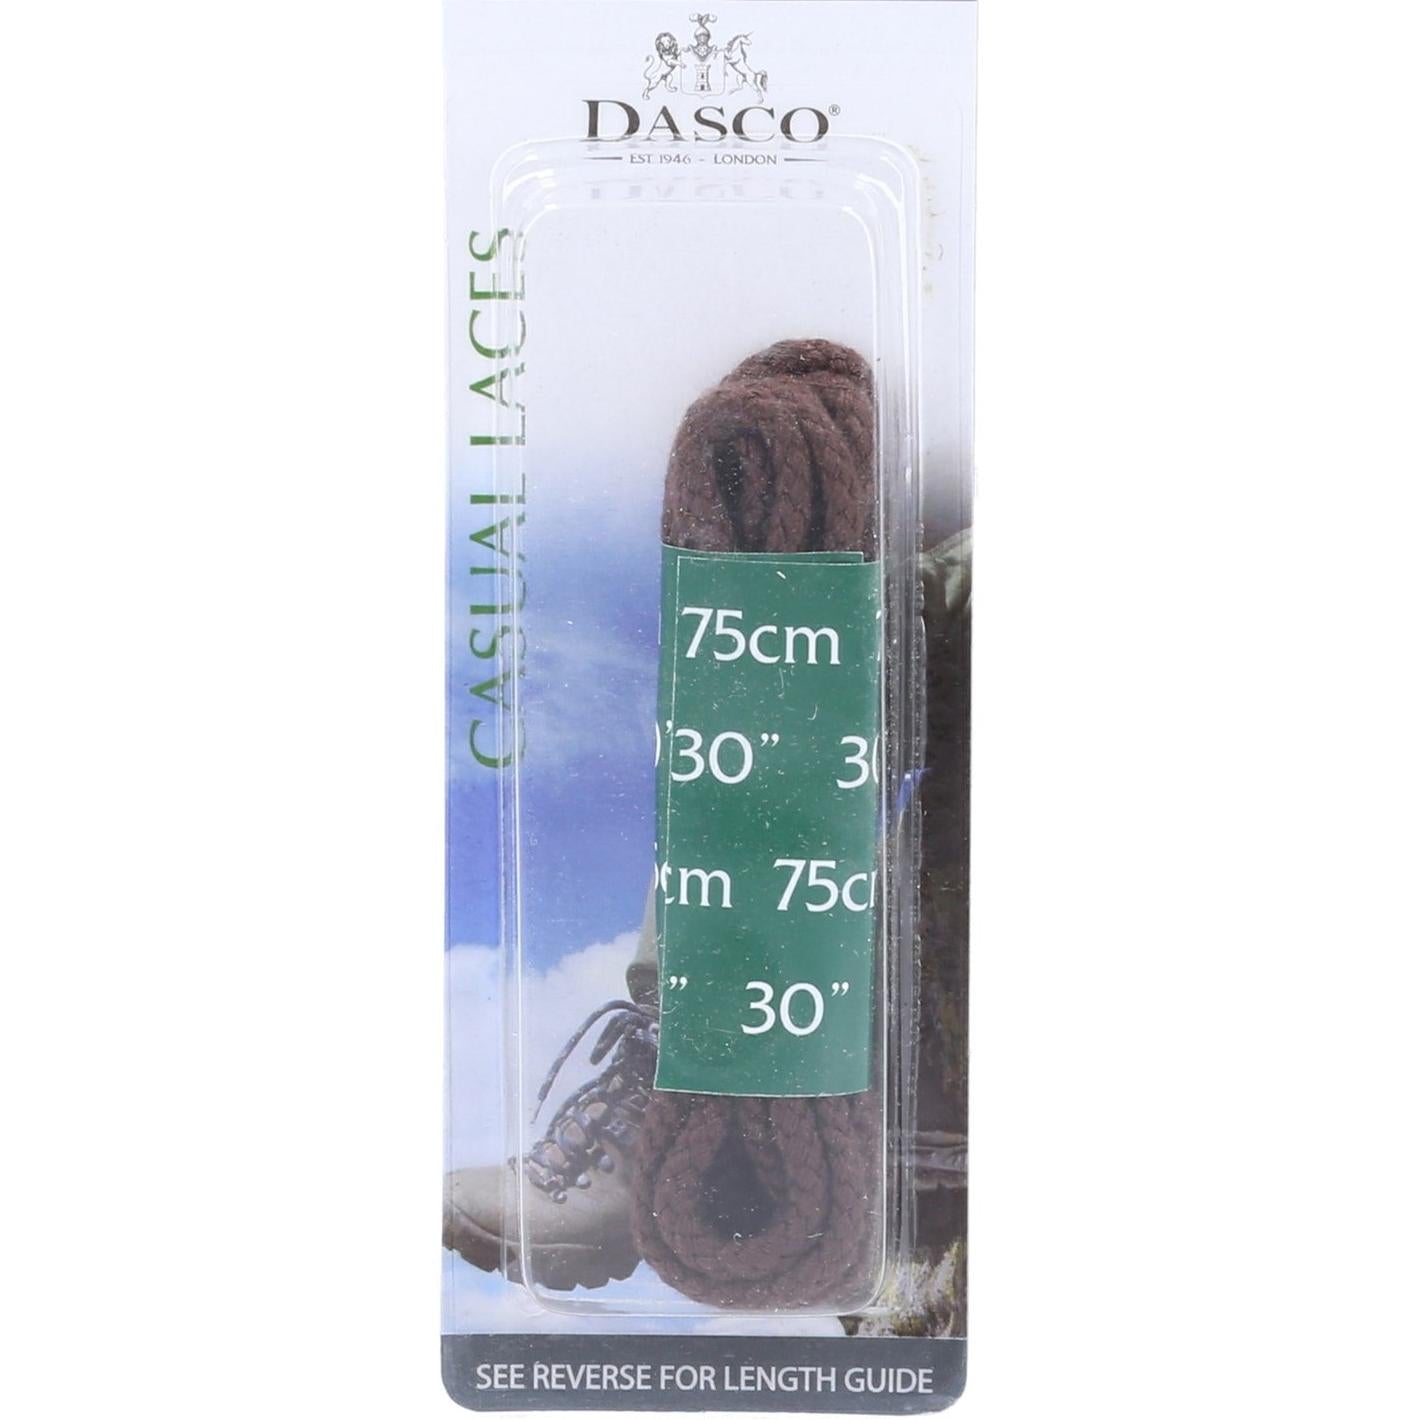 Dasco 120cm Chunky cord Lace 6 Pack Shoes